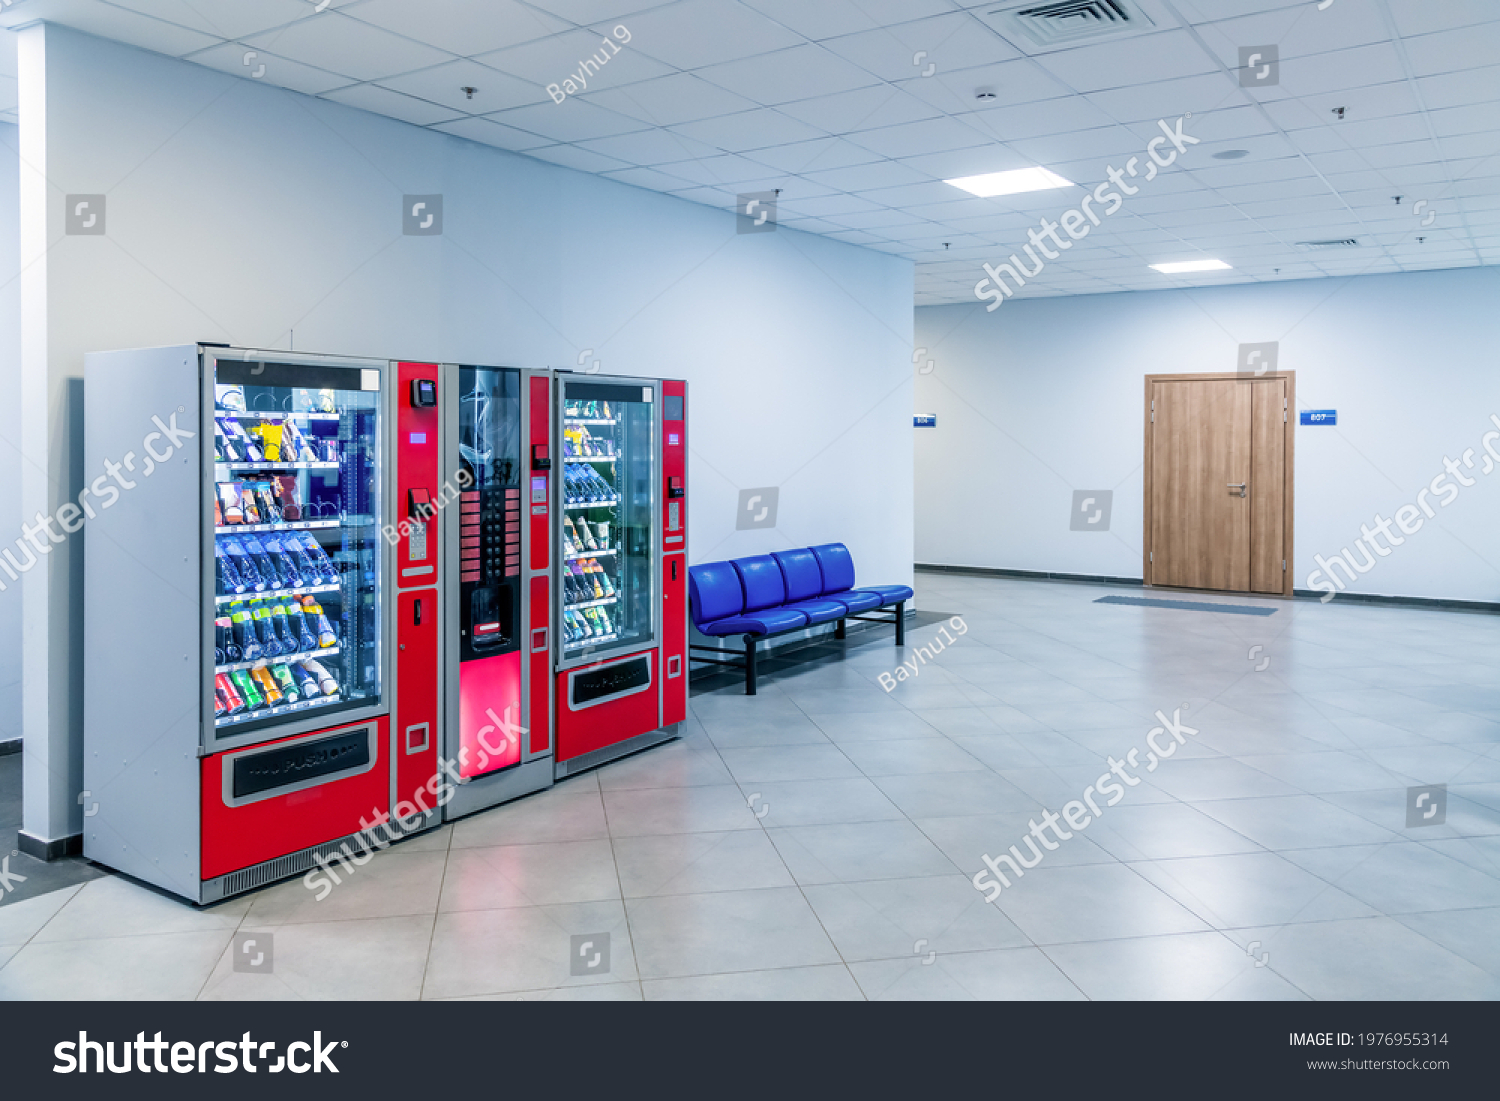 Group of red vending machines stands by the wall. Glare is reflected on a black screen. No people. Copy space for your text. Small business theme. #1976955314